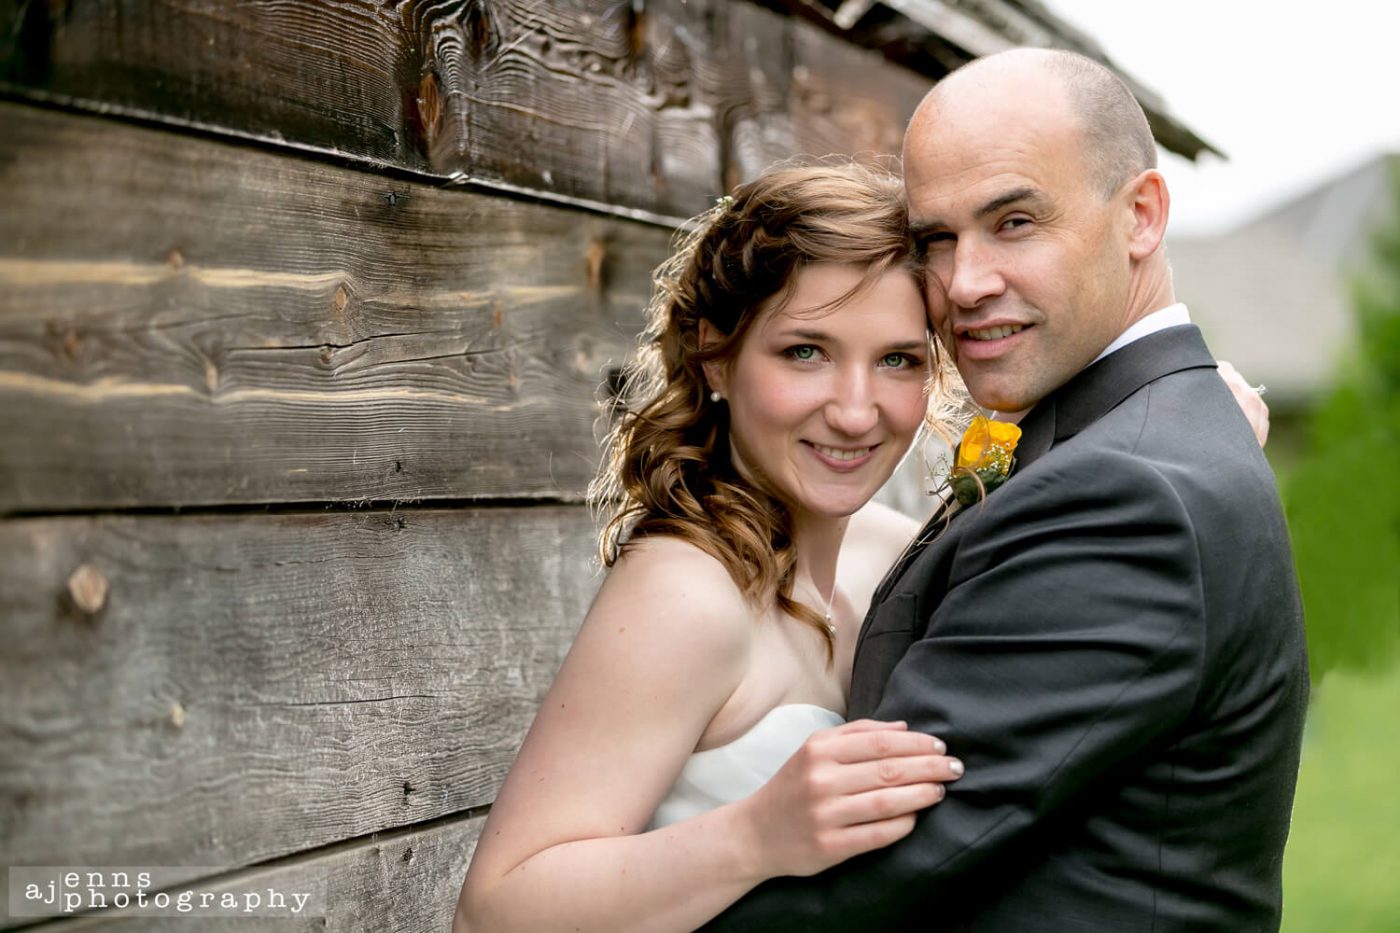 The beautiful bride and groom leaning against a wooden wall